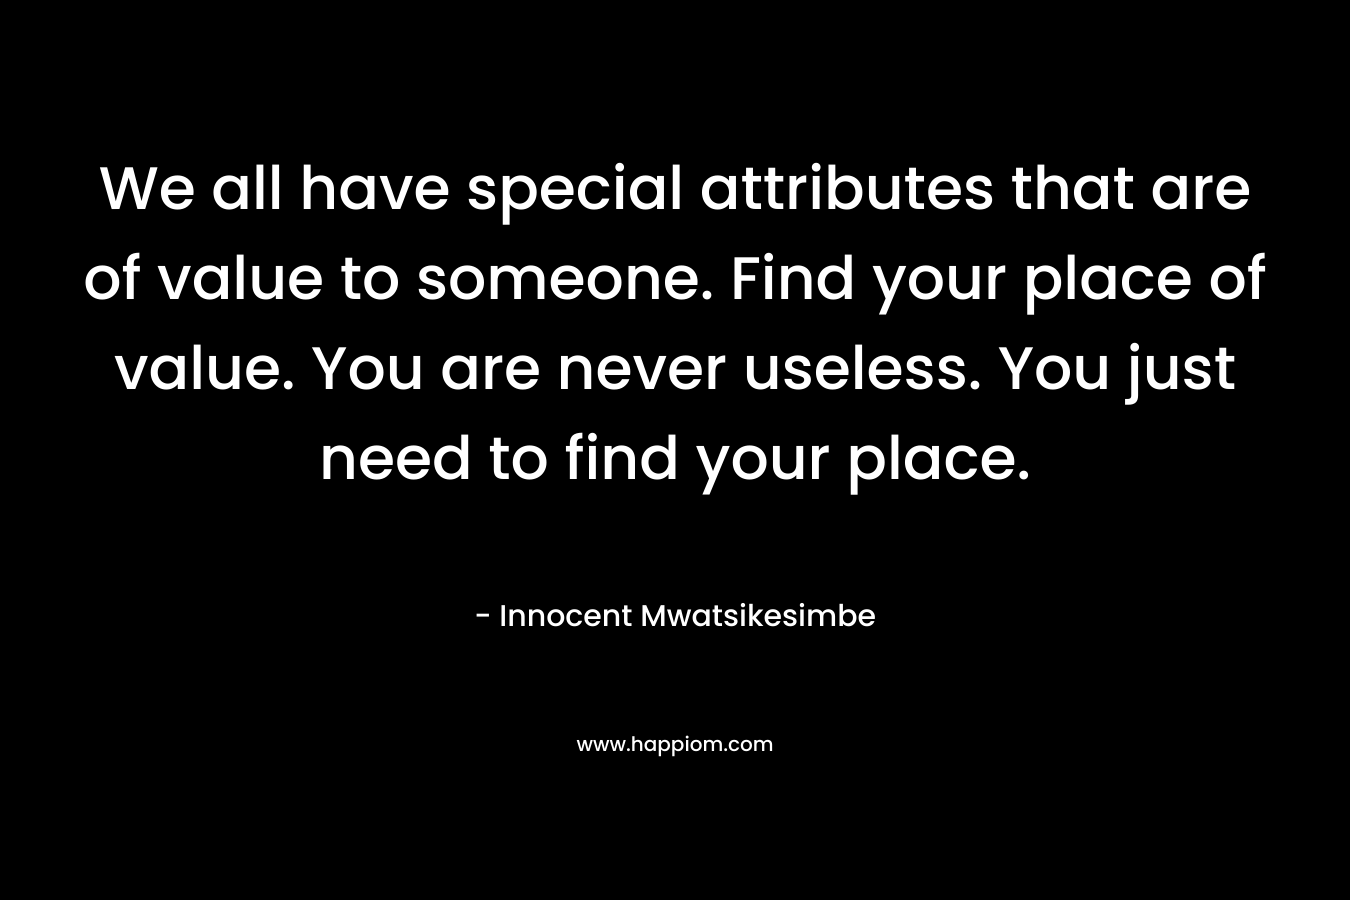 We all have special attributes that are of value to someone. Find your place of value. You are never useless. You just need to find your place.